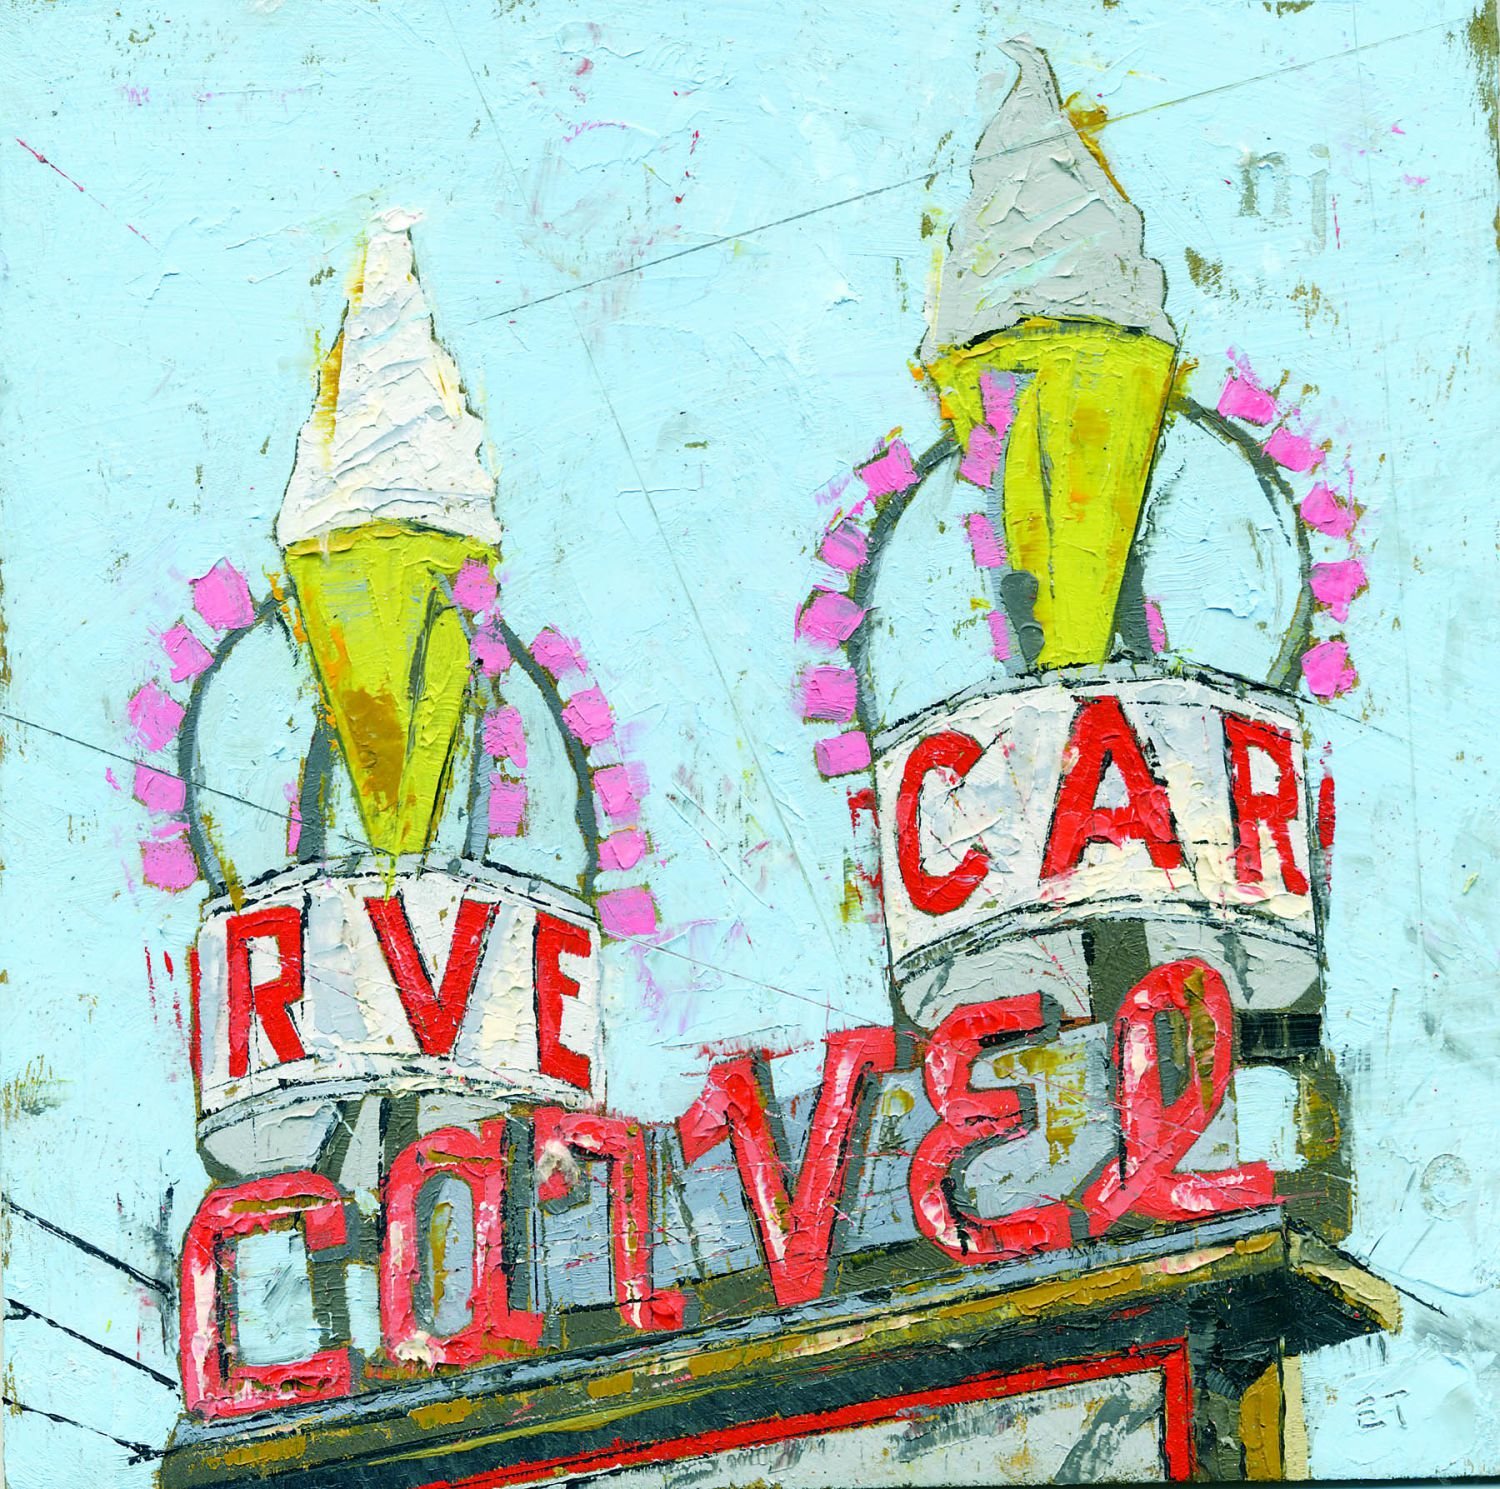 “Carvel Hackensack” is by Emily Thompson.